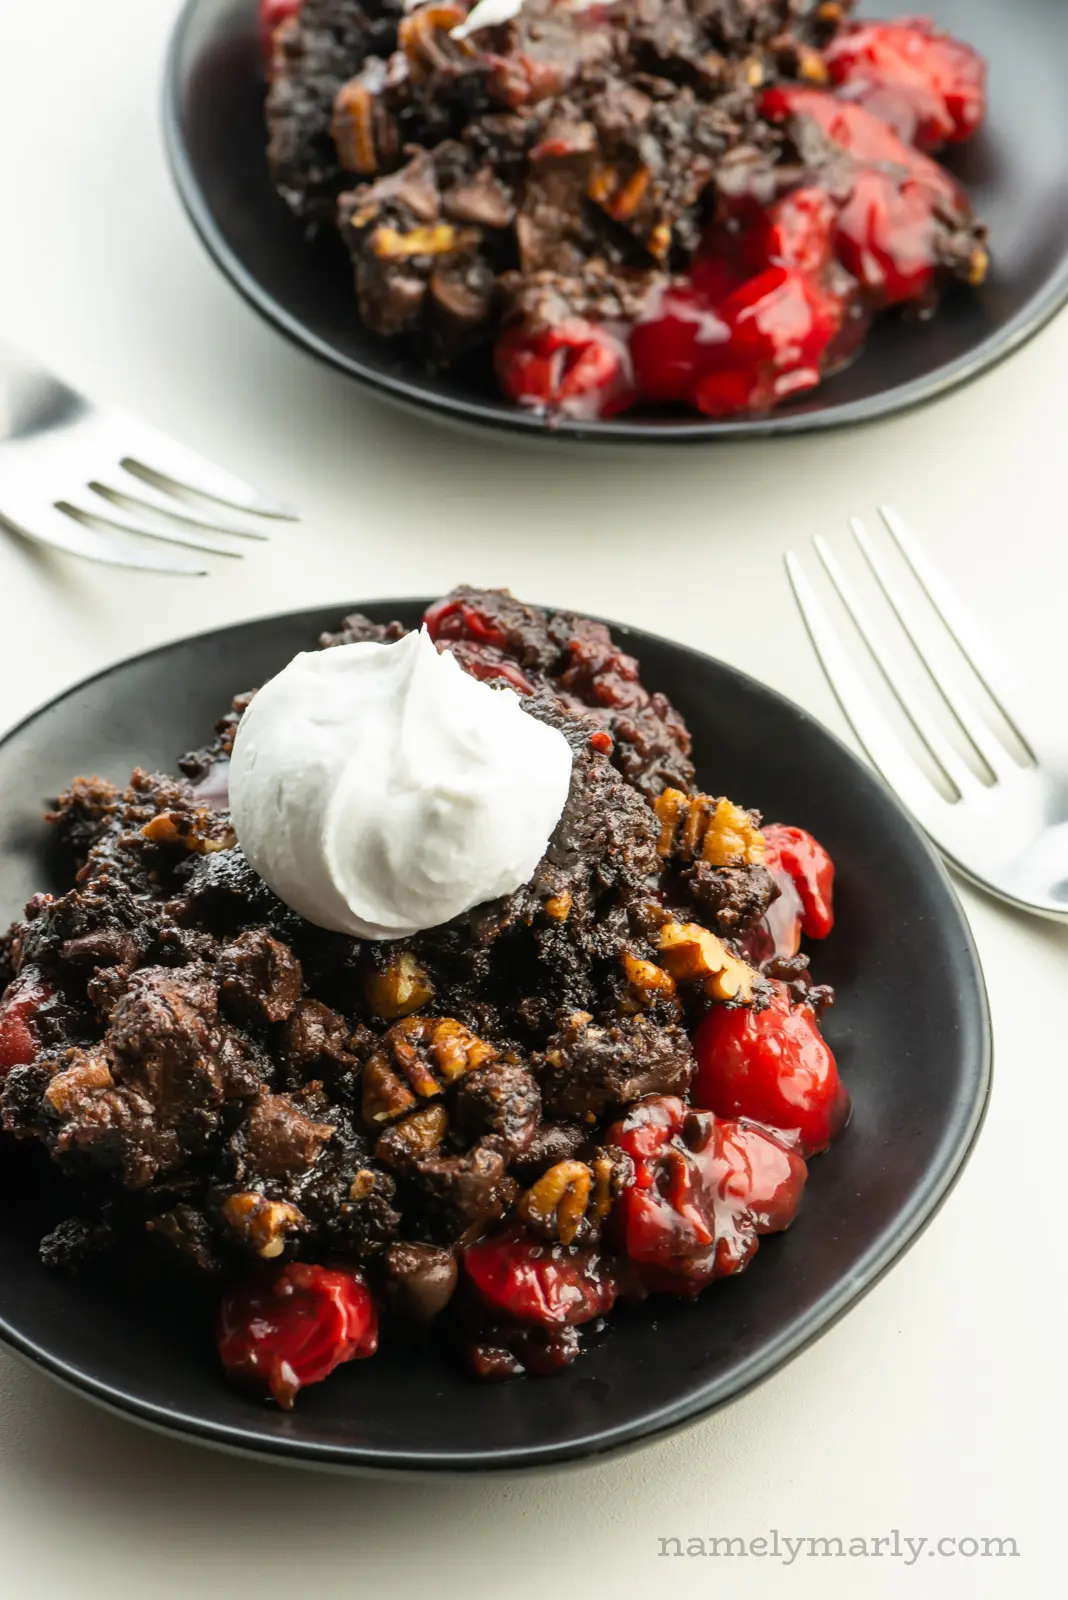 Looking down on two plates with chocolate cherry dump cake and forks between them.